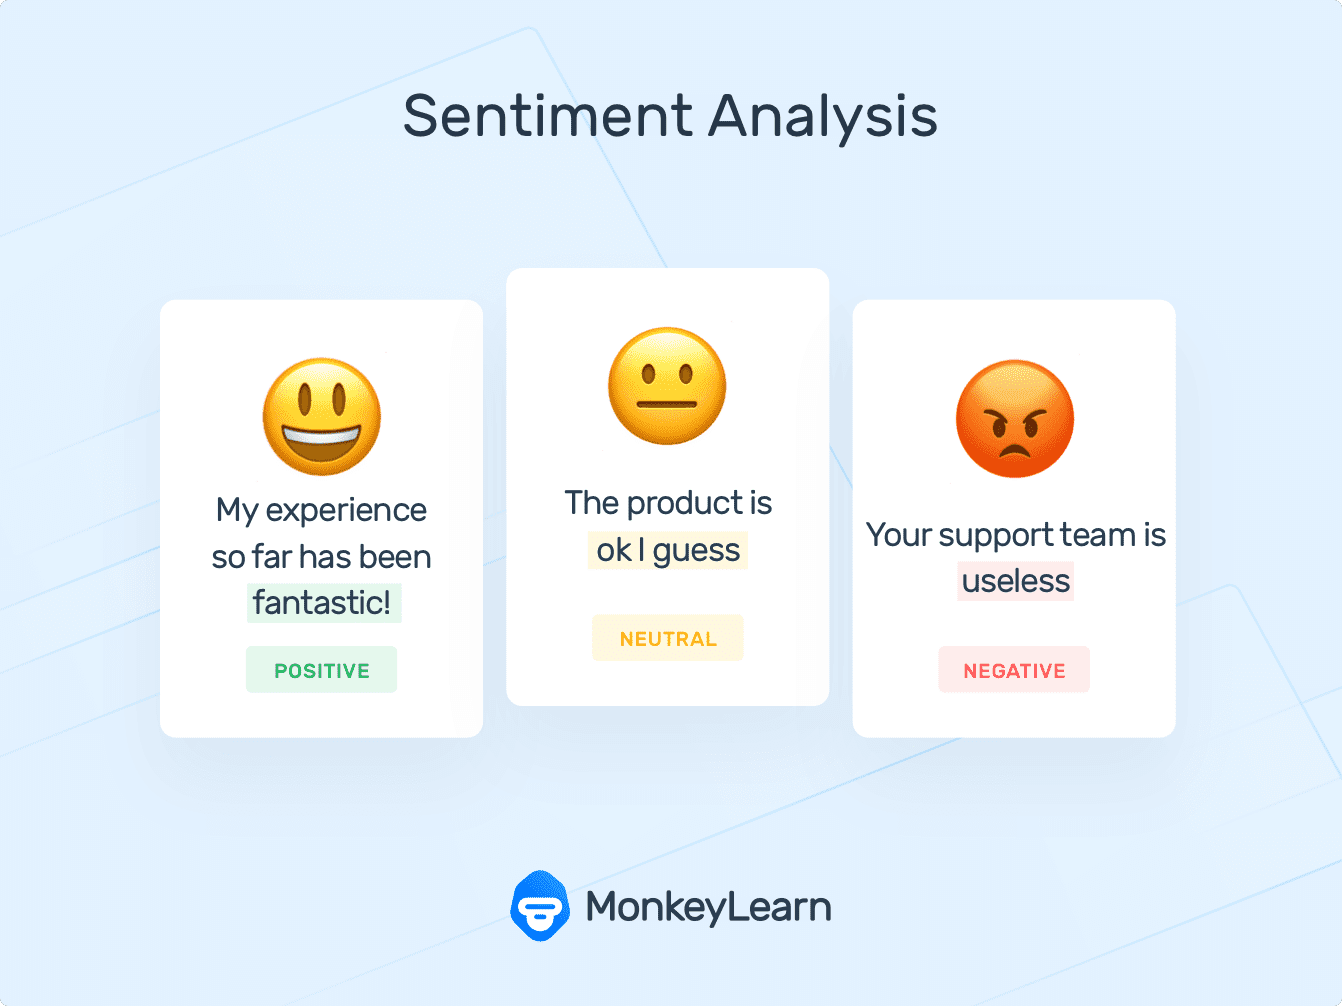 twitter sentiment analysis research papers 2020